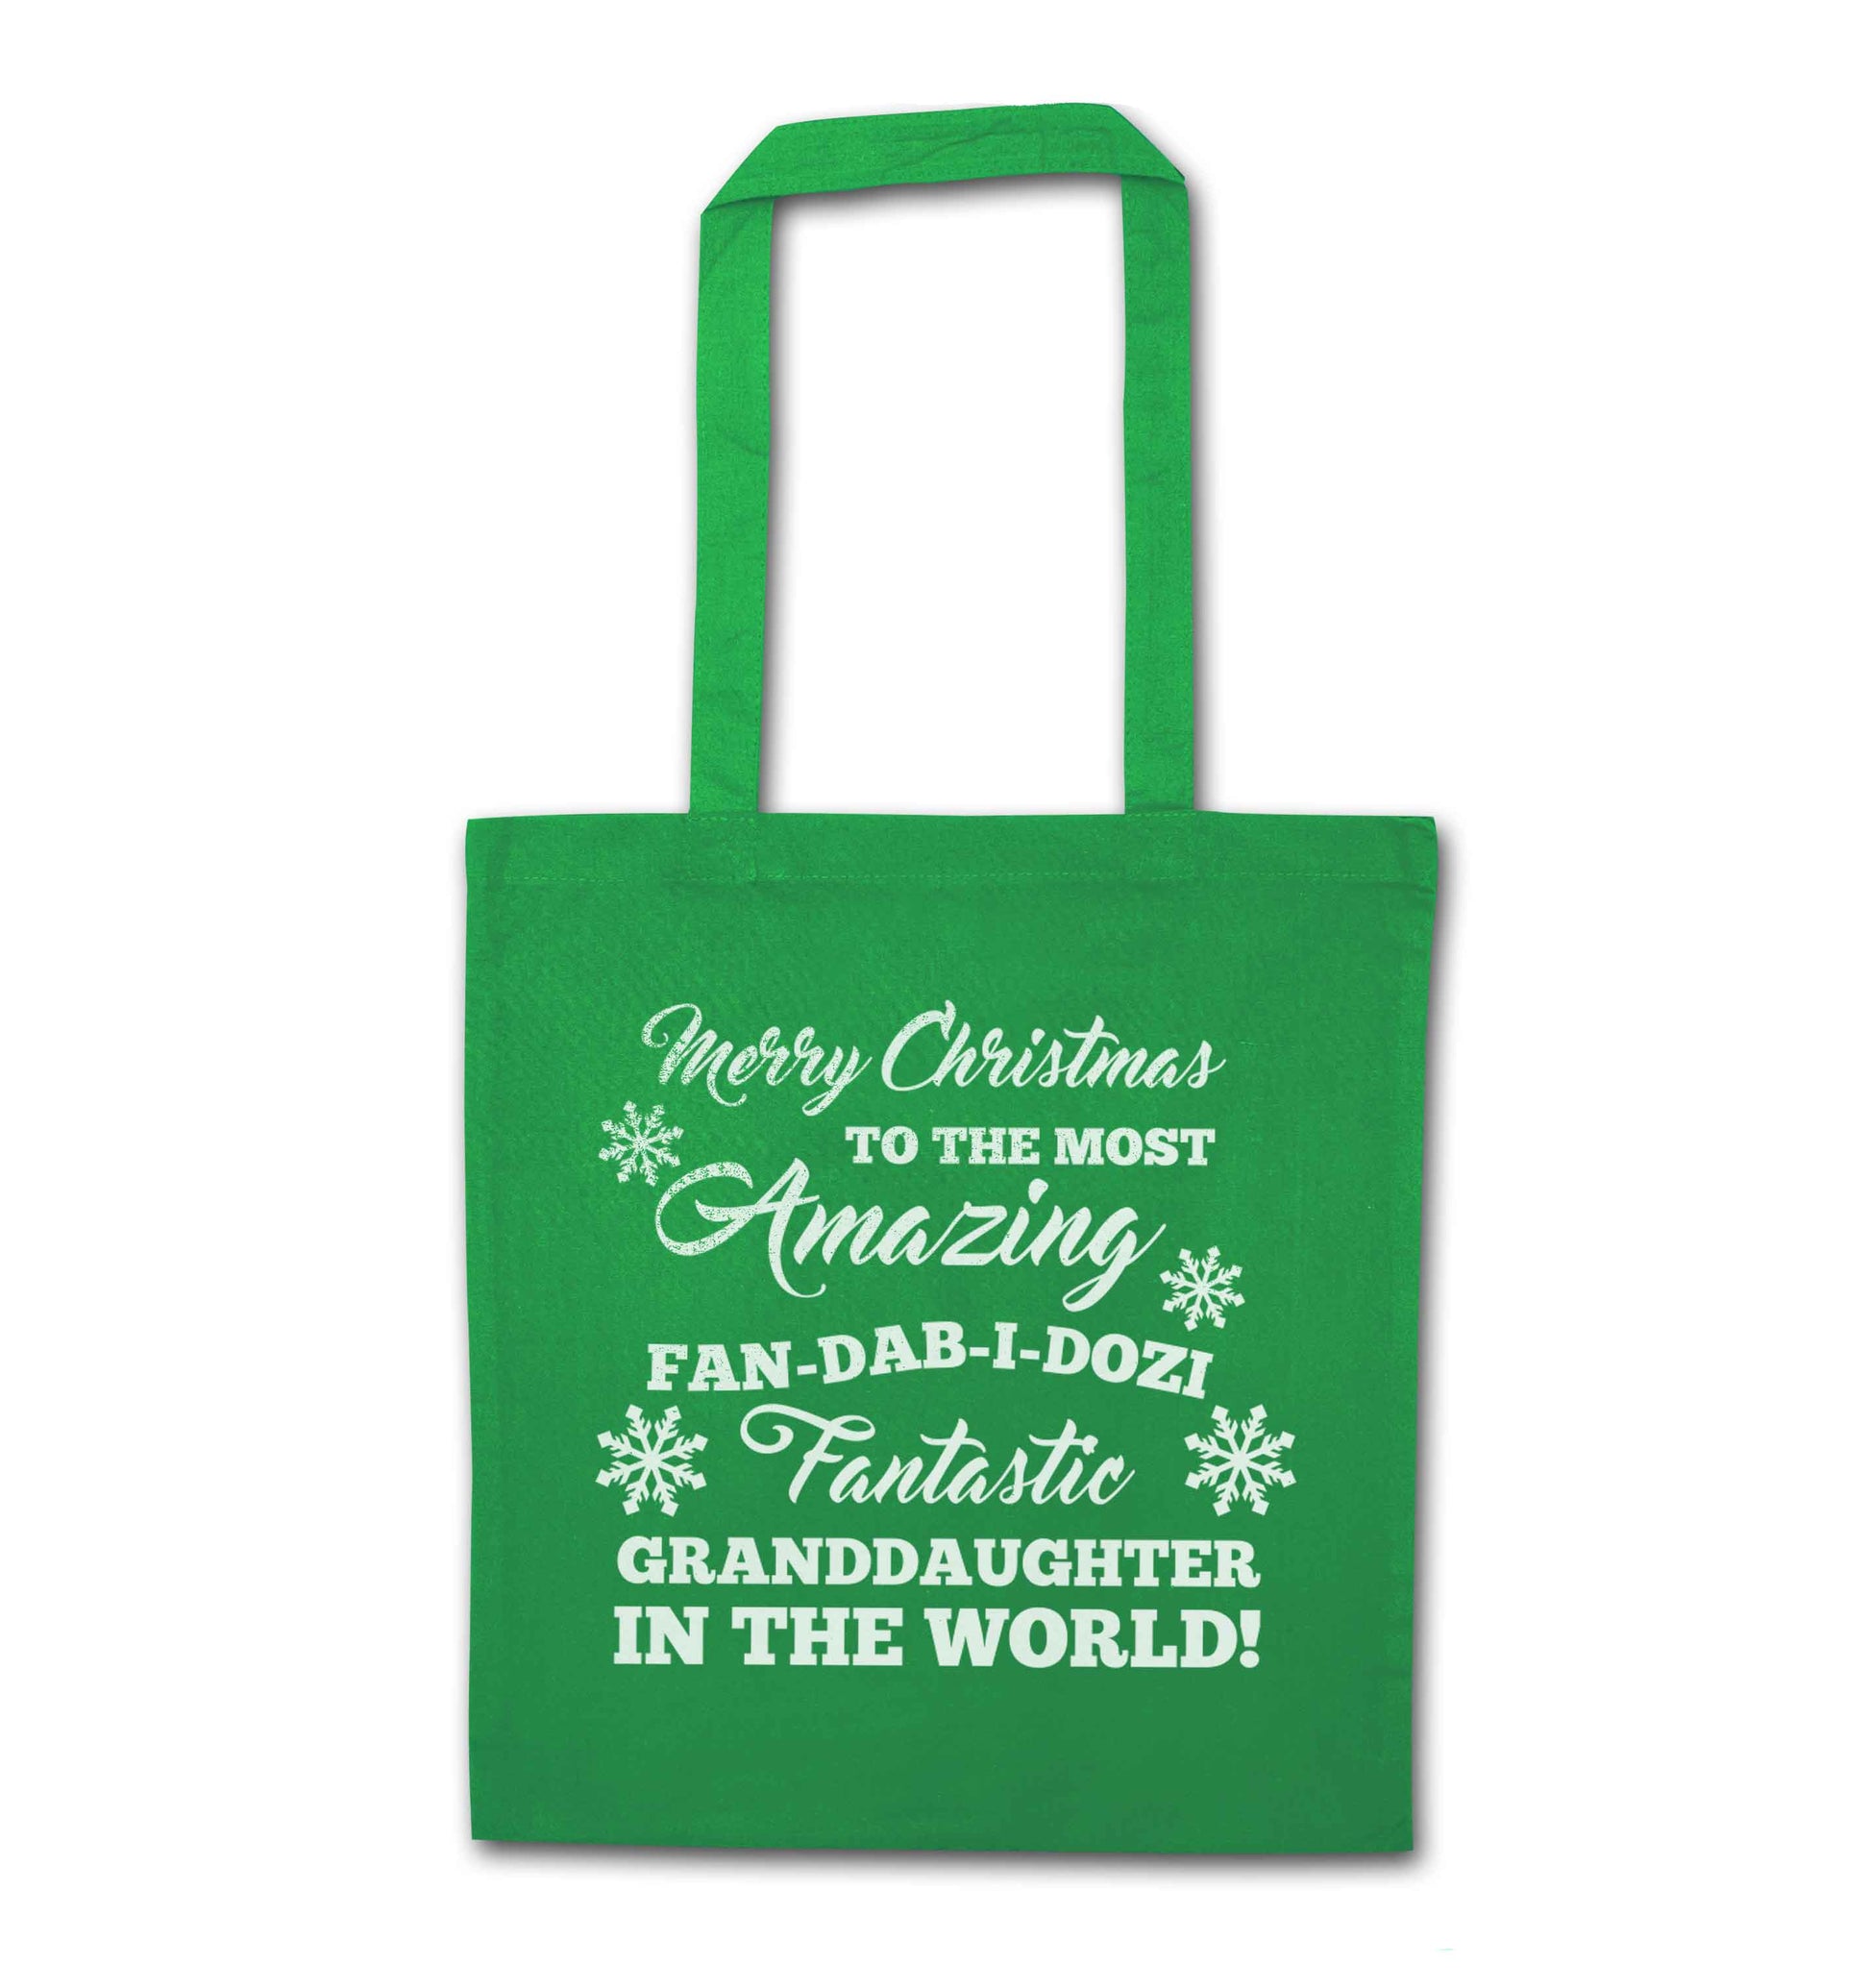 Merry Christmas to the most amazing fan-dab-i-dozi fantasic Granddaughter in the world green tote bag